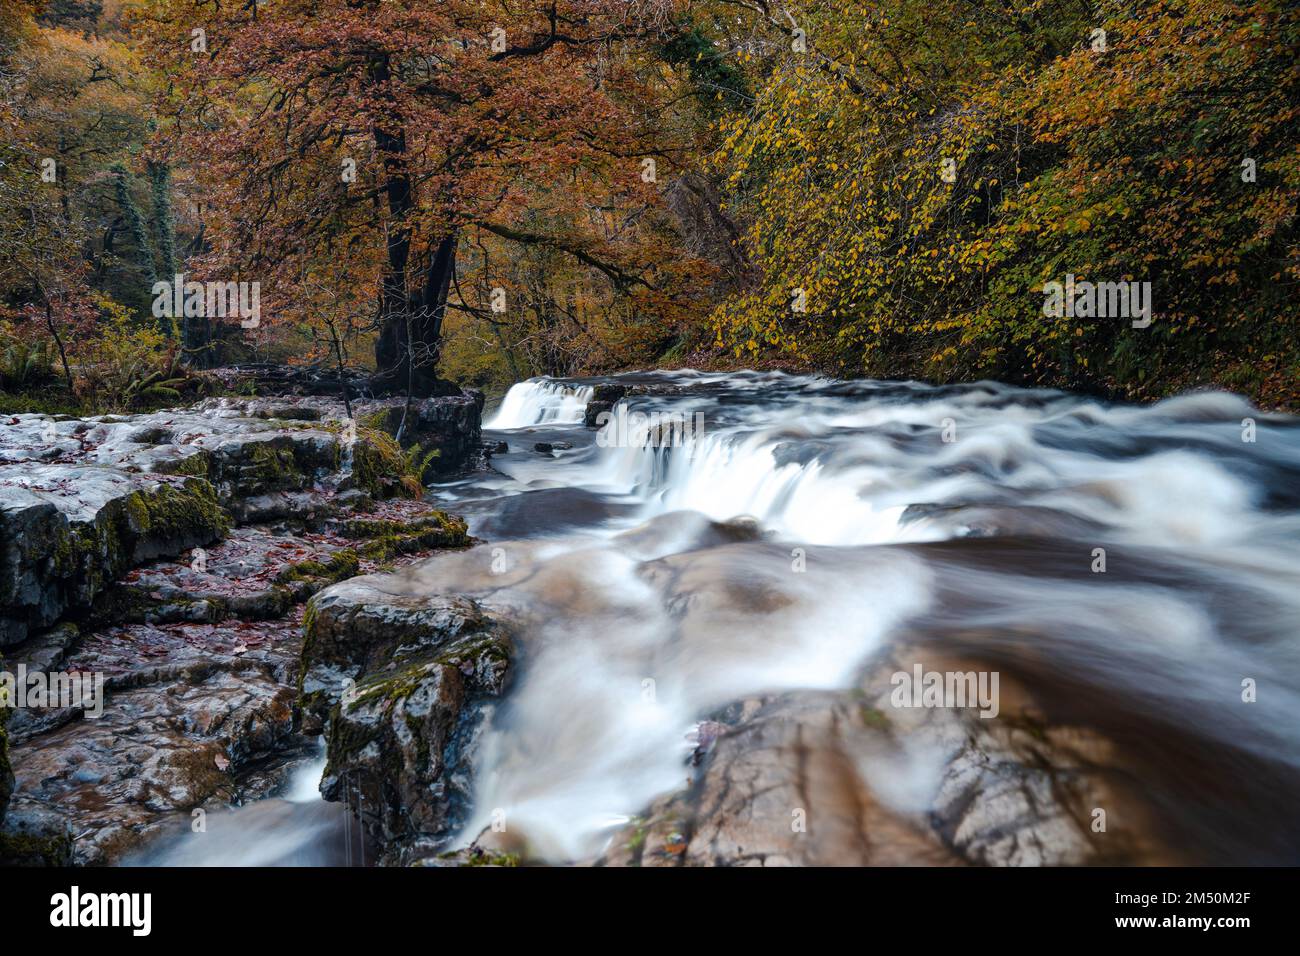 Sgwd y Pannwr waterfalls along the Four Waterfalls walk, Waterfall Country, Brecon Beacons national park, South Wales, the United Kingdom. Long exposure. Stock Photo